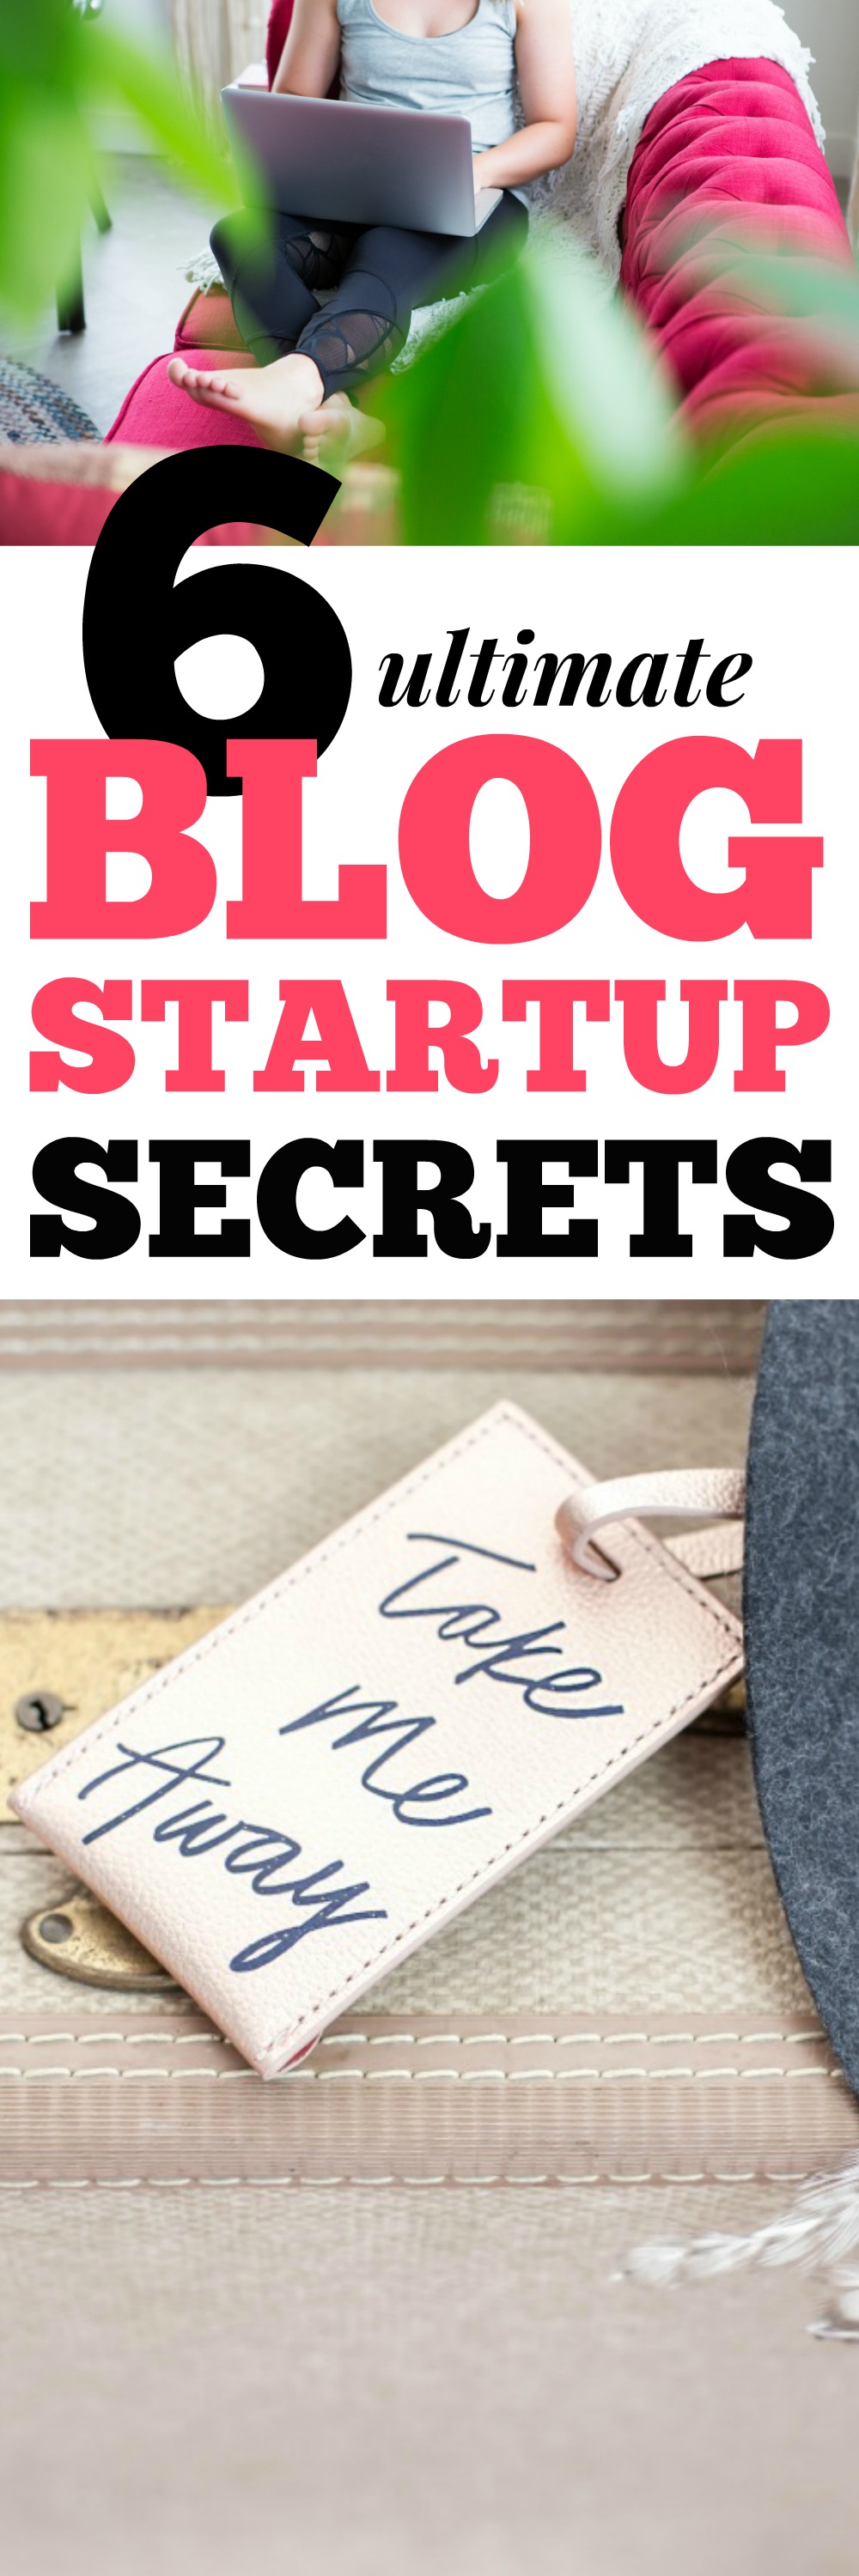 Great list of blog startup tips! 6 honest thoughts on how to start a blog smarter not harder.